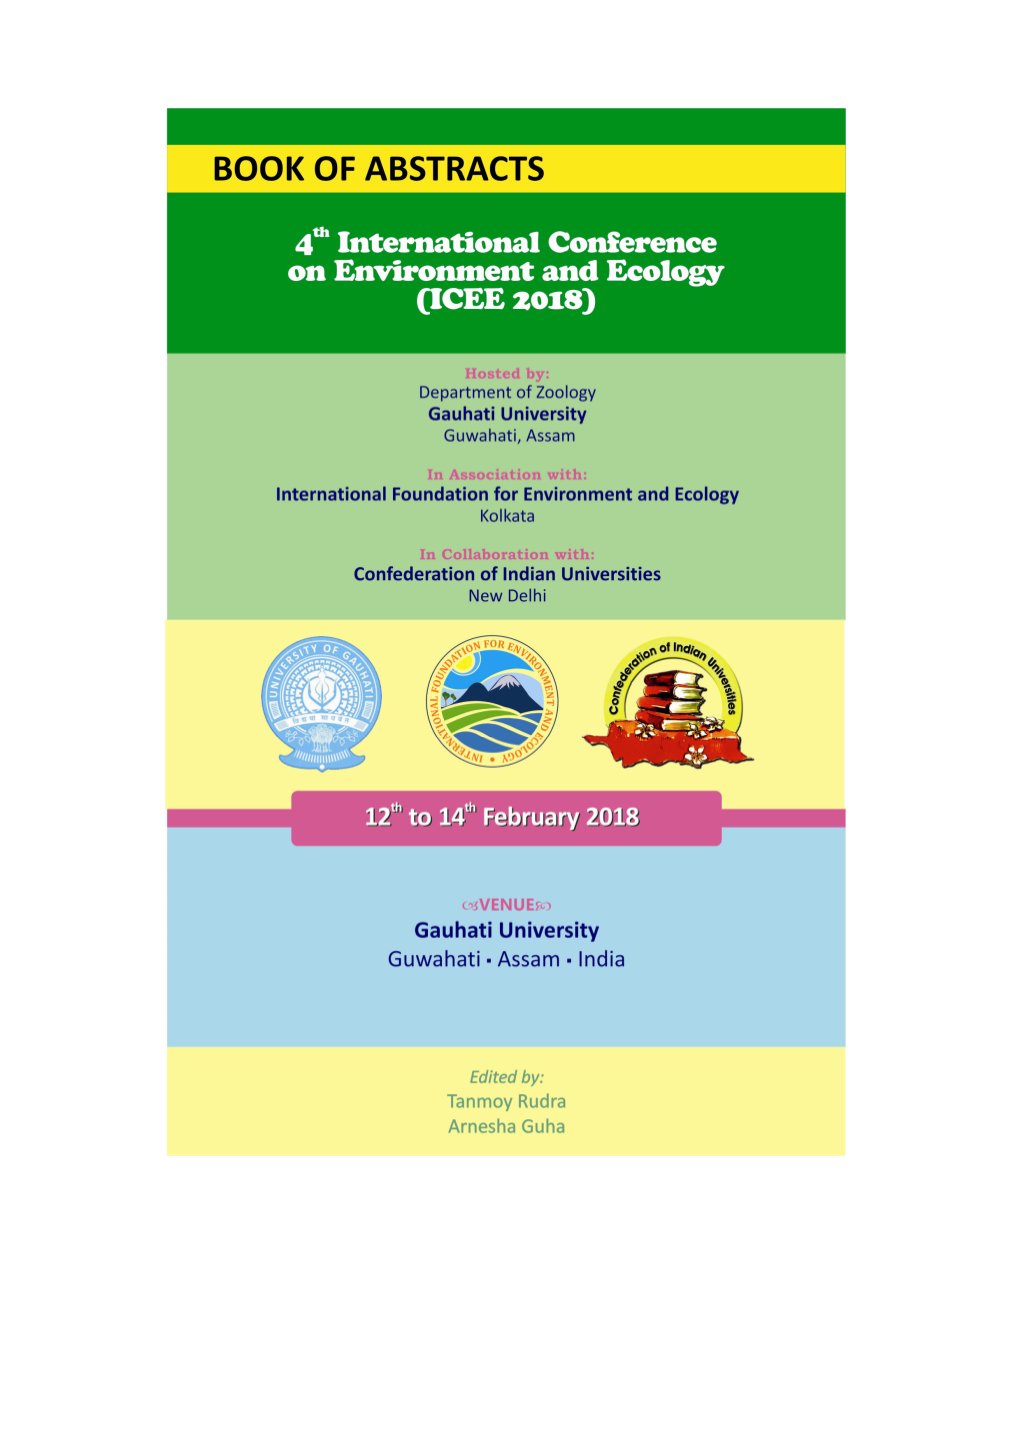 4Th International Conference on Environment and Ecology 2018